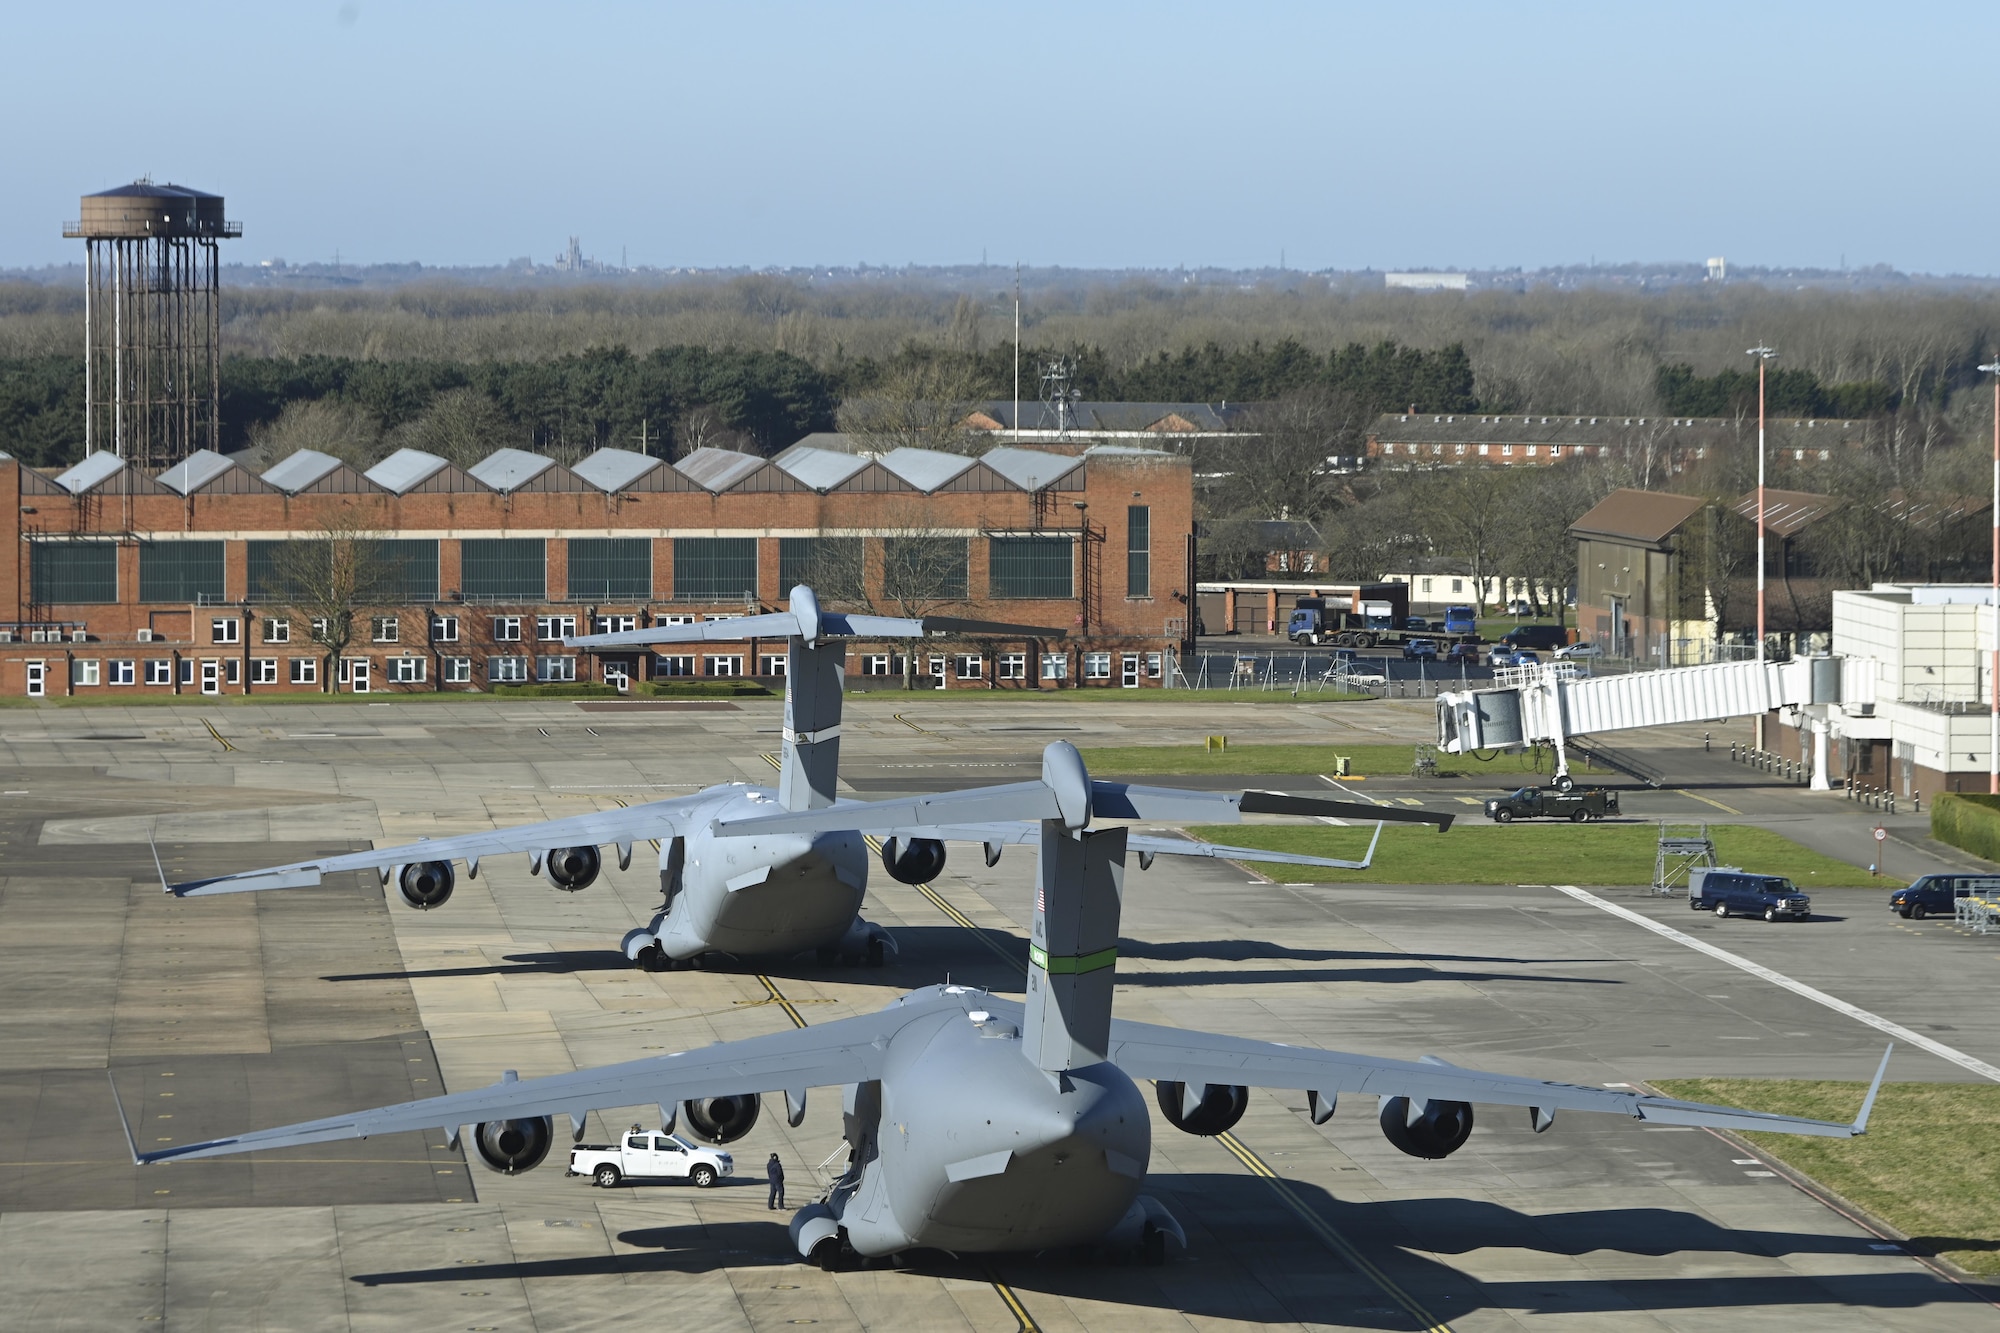 Two U.S. Air Force C-17 Globemaster III aircraft assigned to the 60th Air Mobility Wing, Travis Air Force Base, Calif., and the 62nd Airlift Wing, Joint Base Lewis-McChord, Wash., sit on the flightline after landing at Royal Air Force Mildenhall, England, Feb. 27, 2022. The aircraft landed at RAF Mildenhall after transporting cargo pallets to an air base in Norway. (U.S. Air Force photo by Senior Airman Joseph Barron)